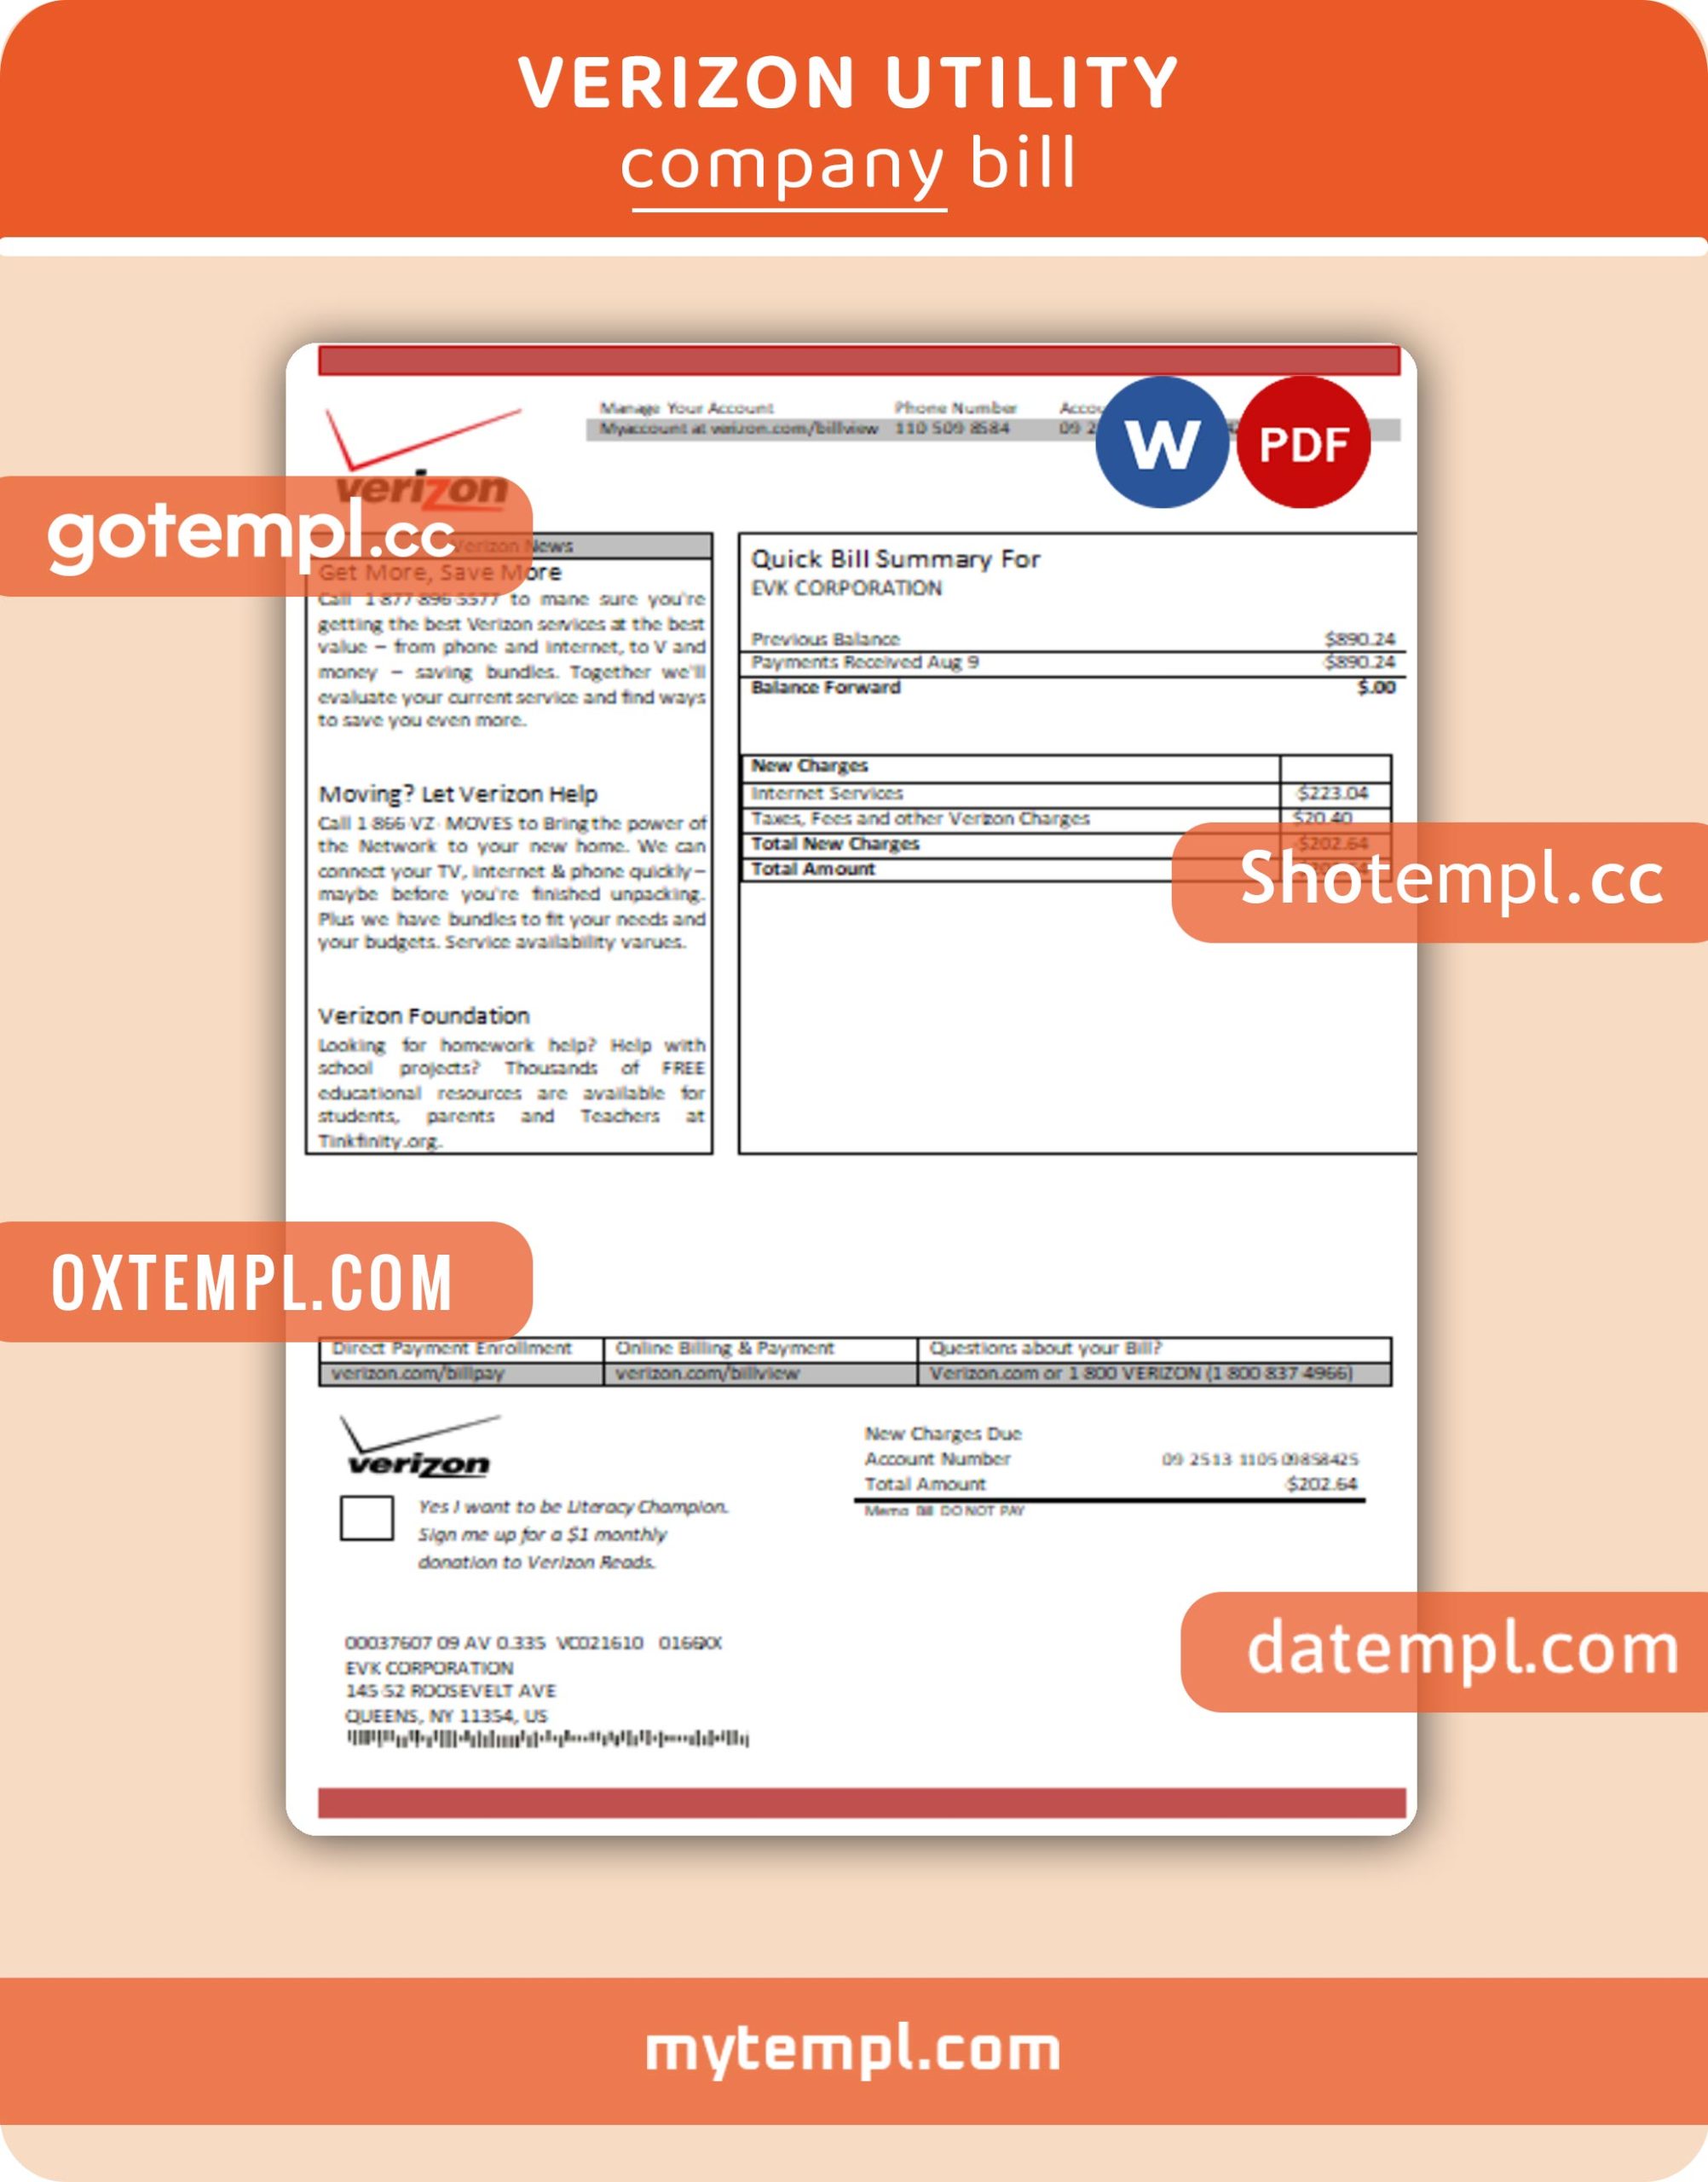 Verizon business utility bill, Word and PDF template, 2 pages